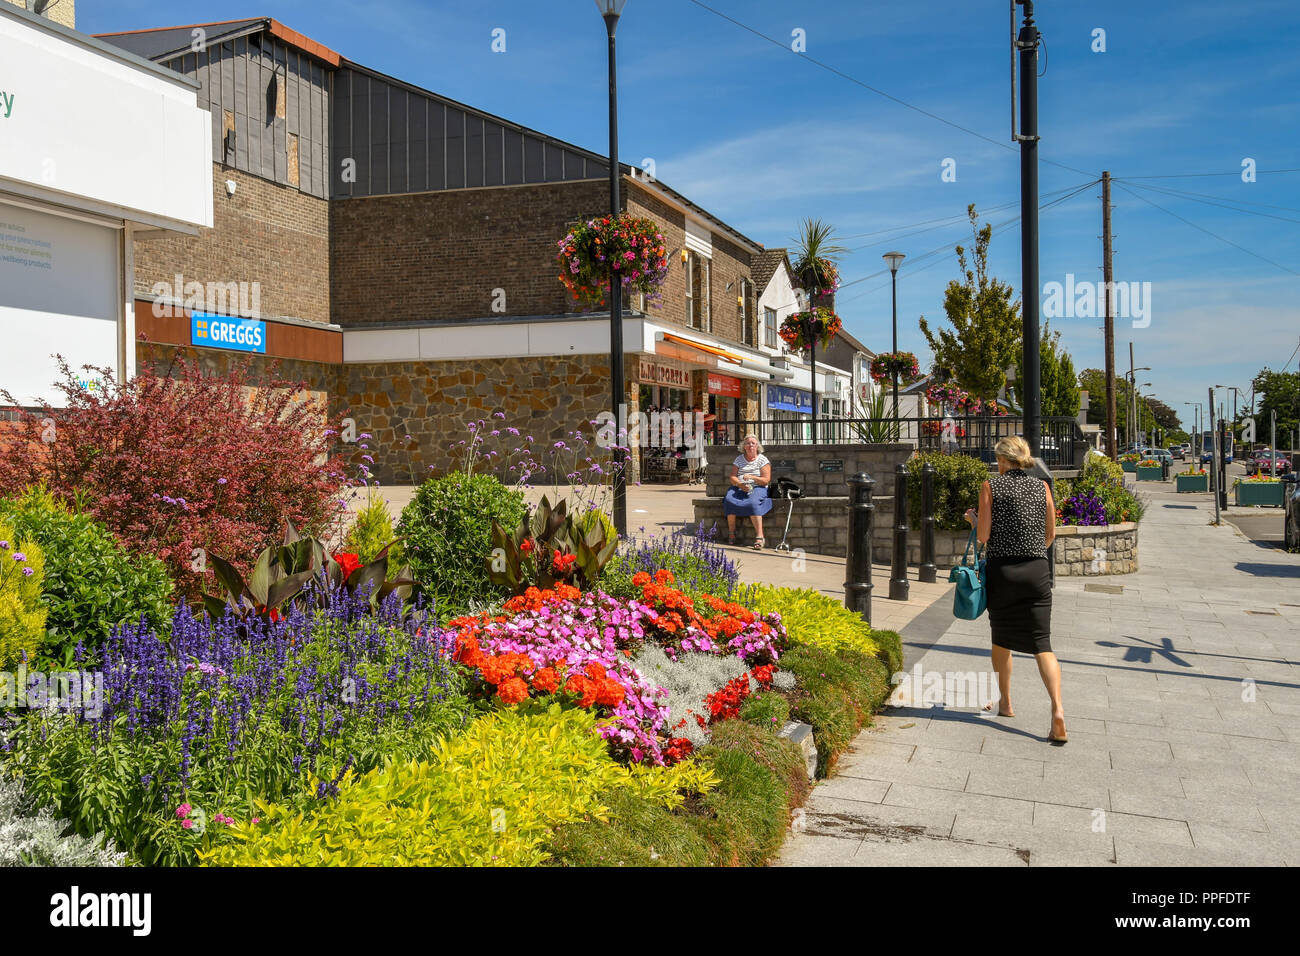 Shopping centre on Boverton Road, which is the main shopping street in the town of Llantwit Major in the Vale of Glamorgan. Stock Photo